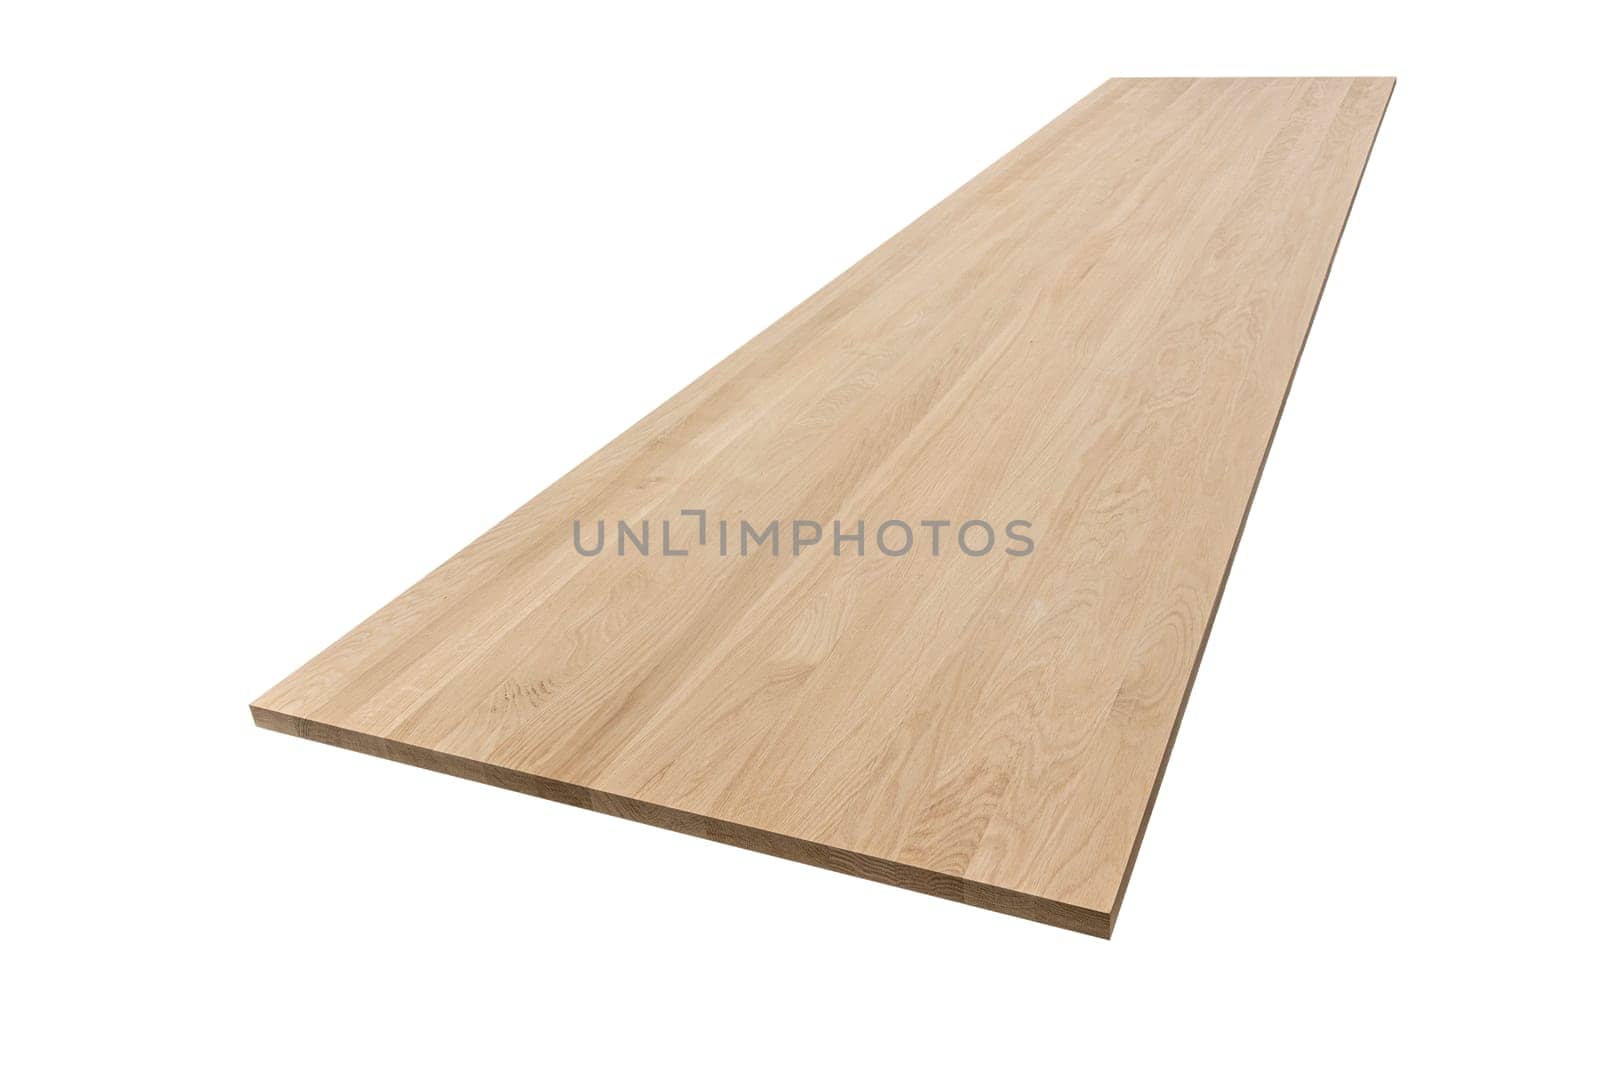 furniture board made of solid oak lamellar on a white background. photo